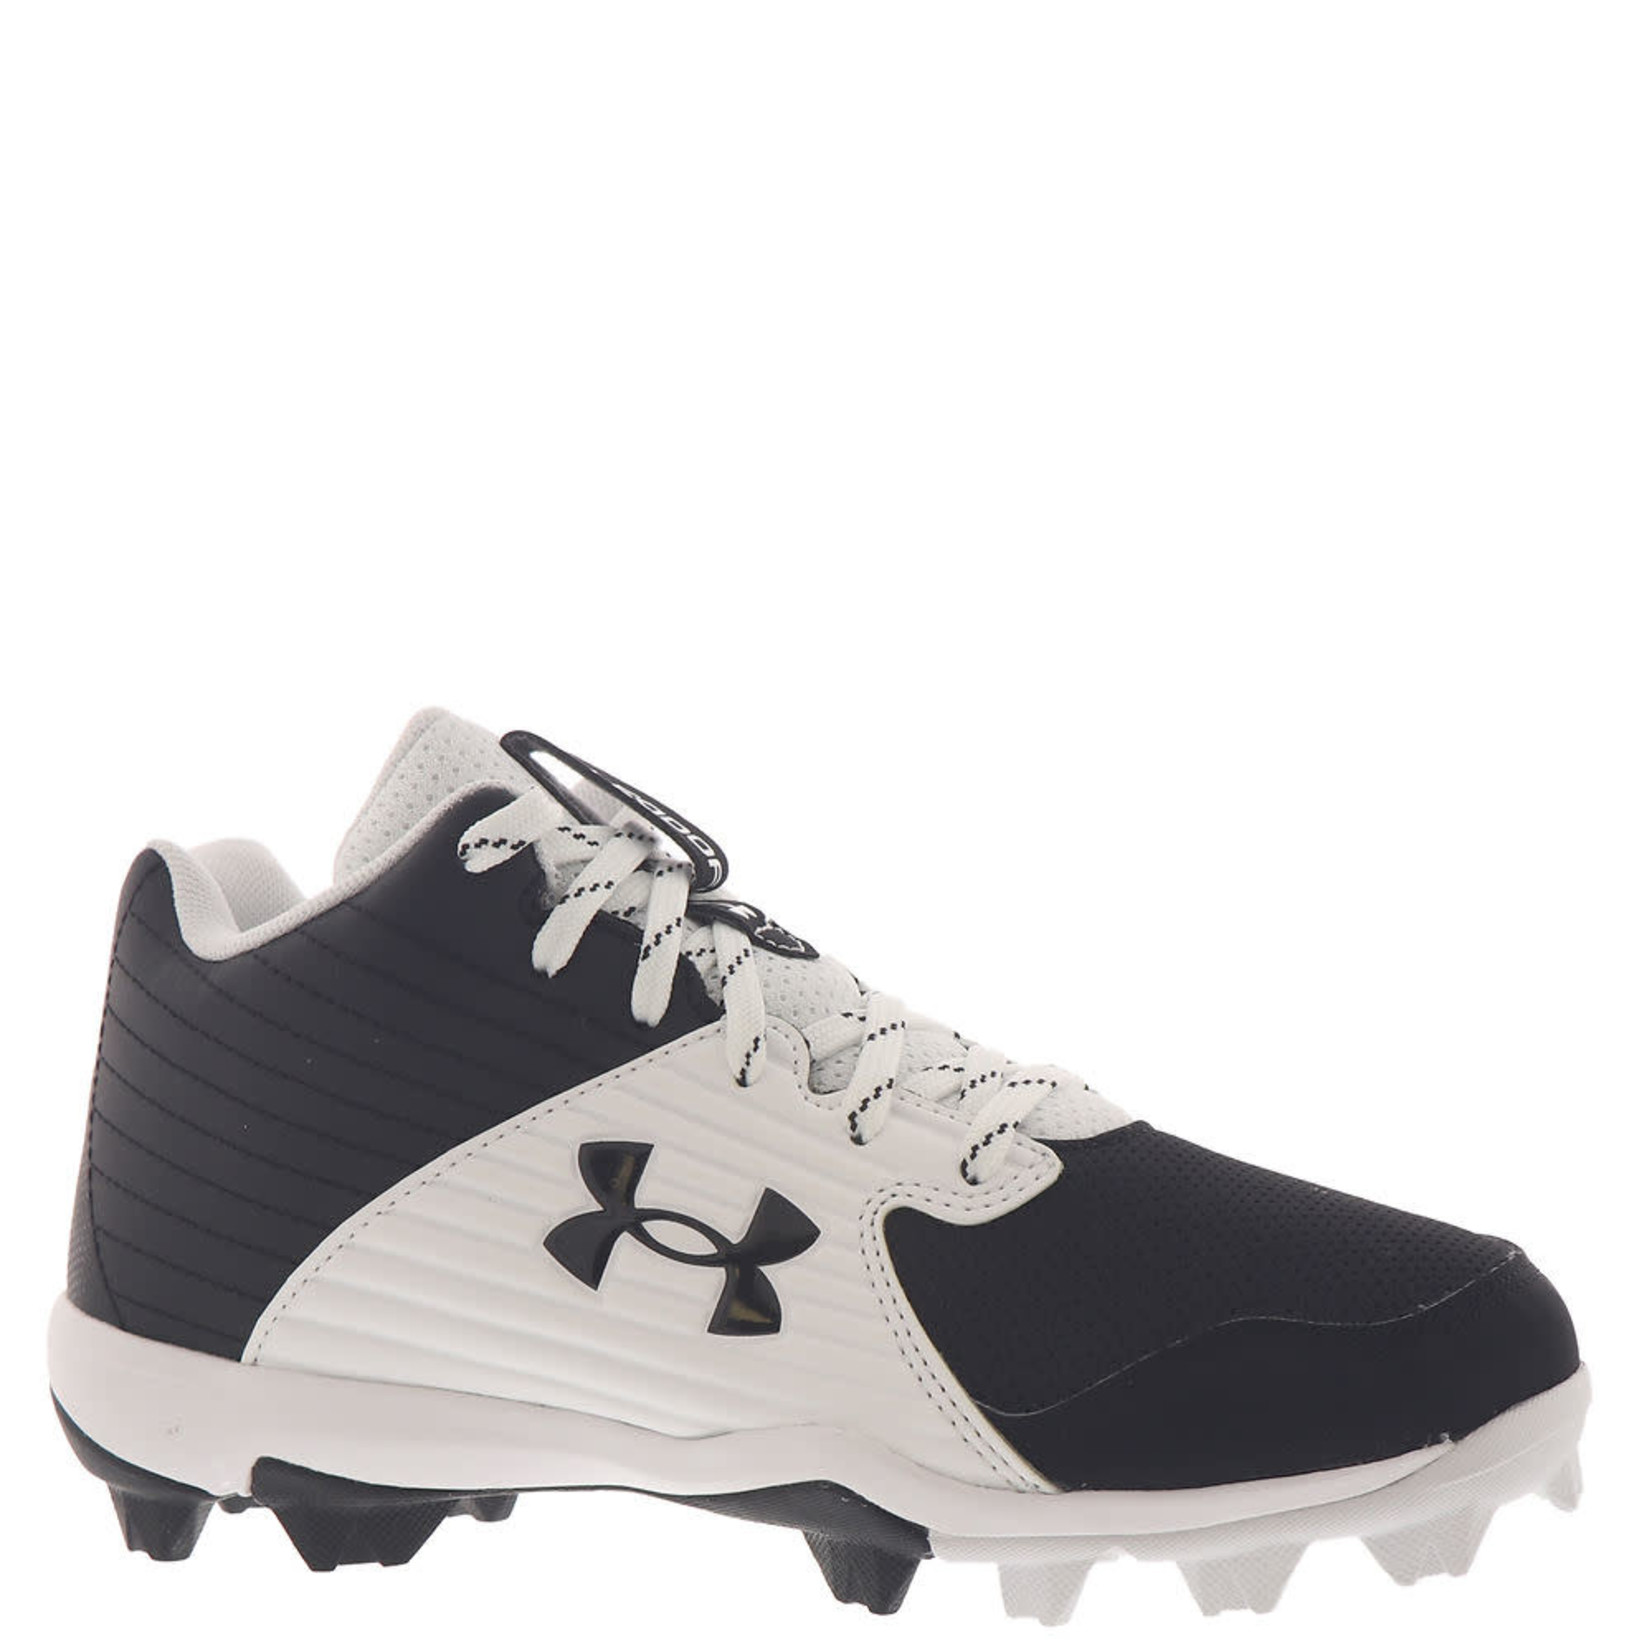 Under Armour Youth Under Armour Leadoff Mid RM Cleats